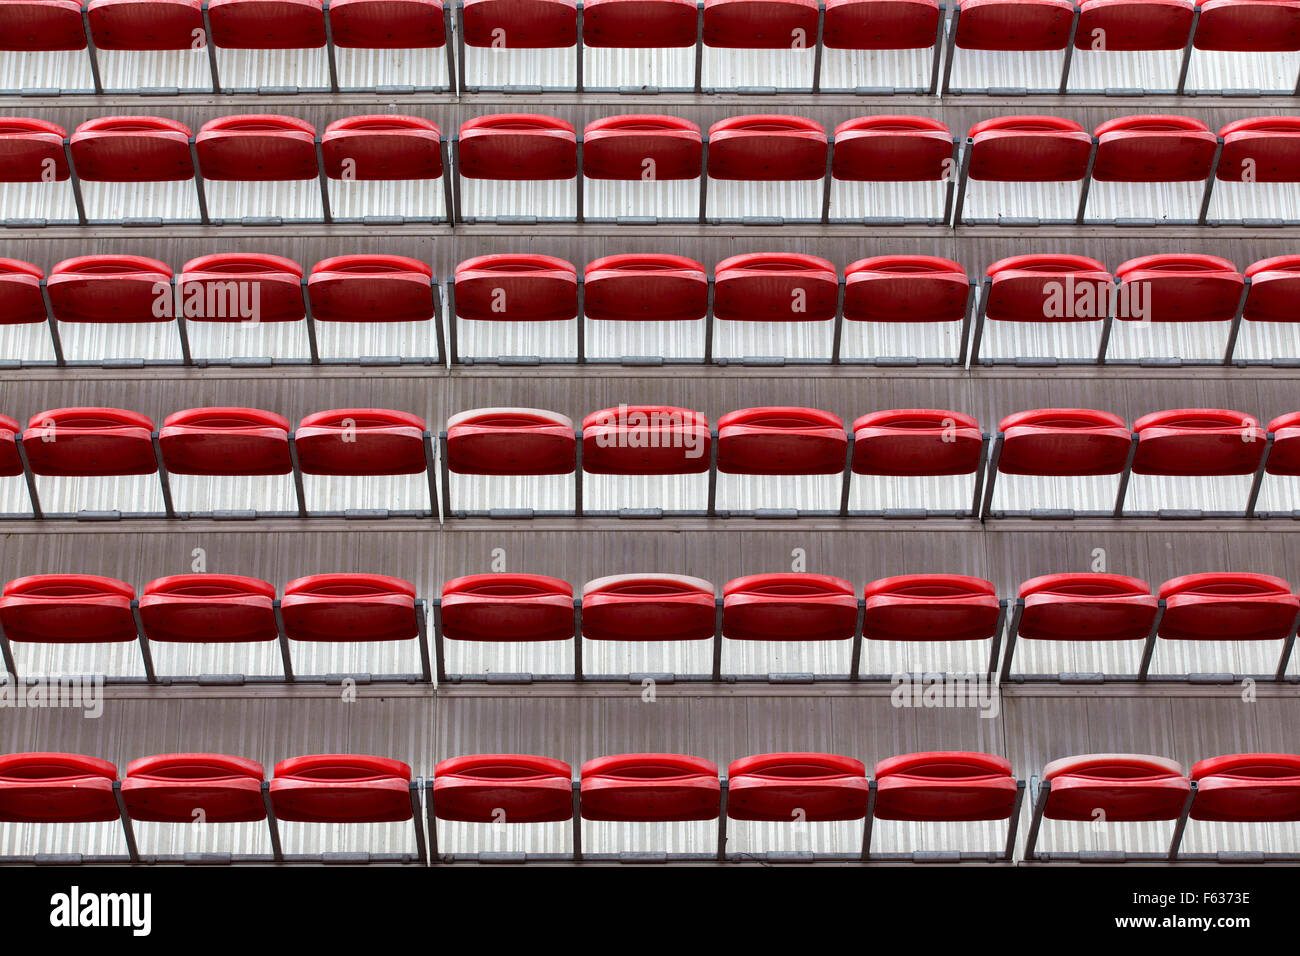 Rows of seats at Gloucester Rugby Club's ground, UK Stock Photo